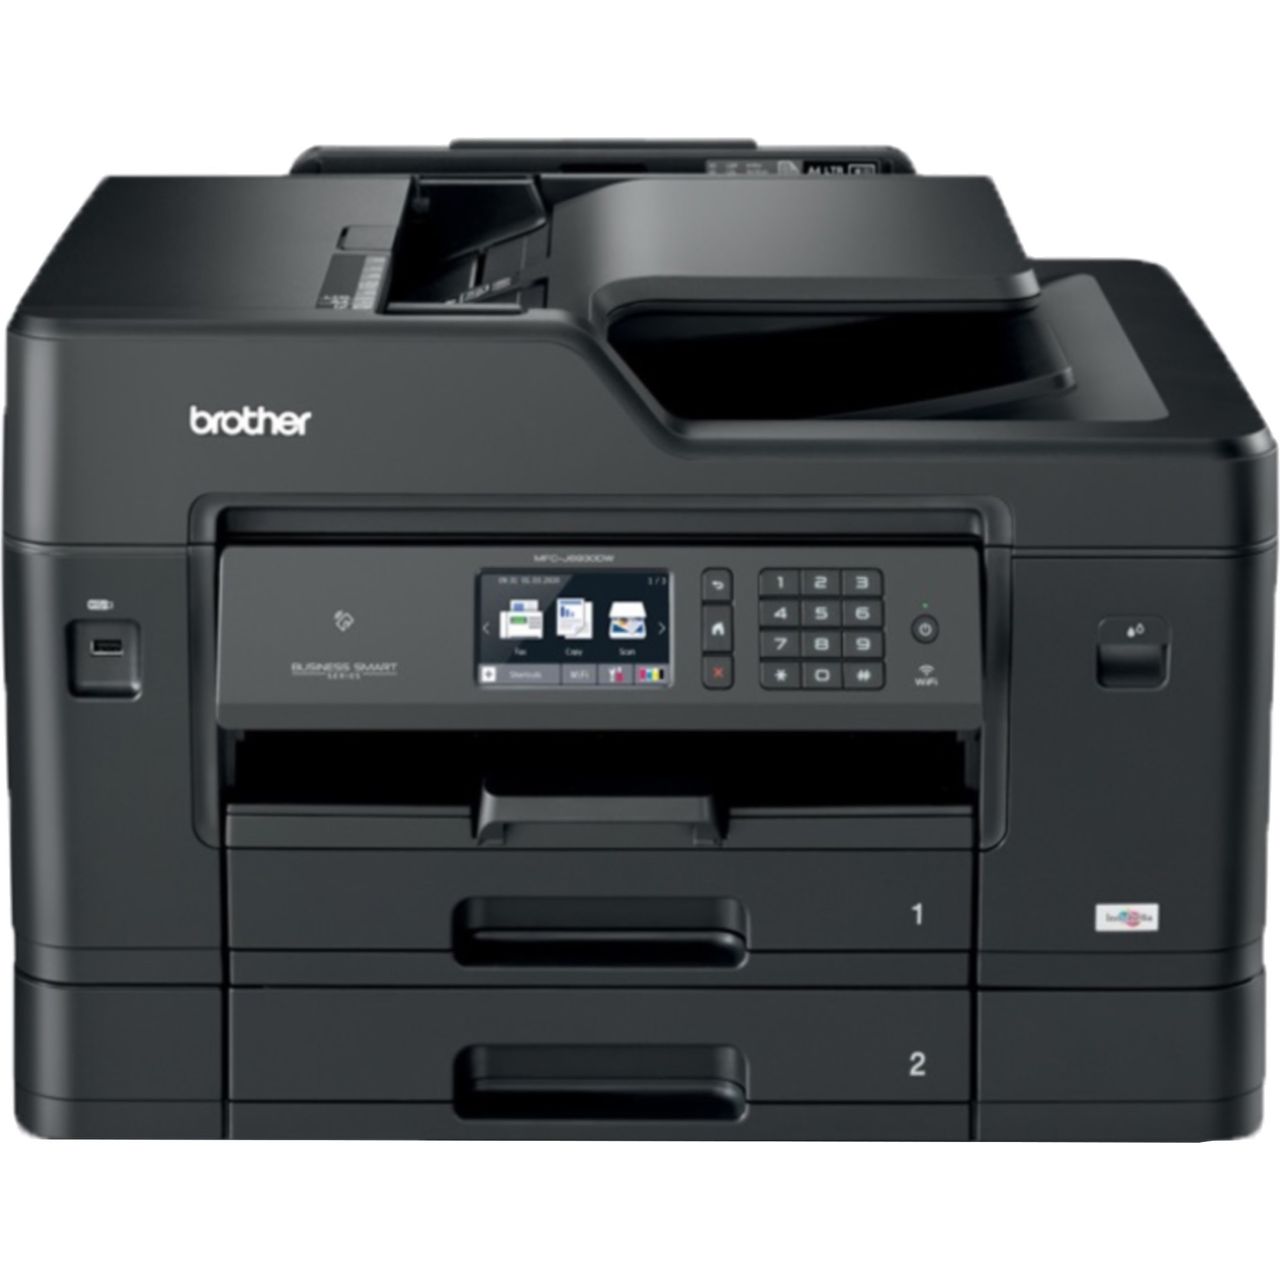 Brother MFC-J6930DW A3 Inkjet Printer Review